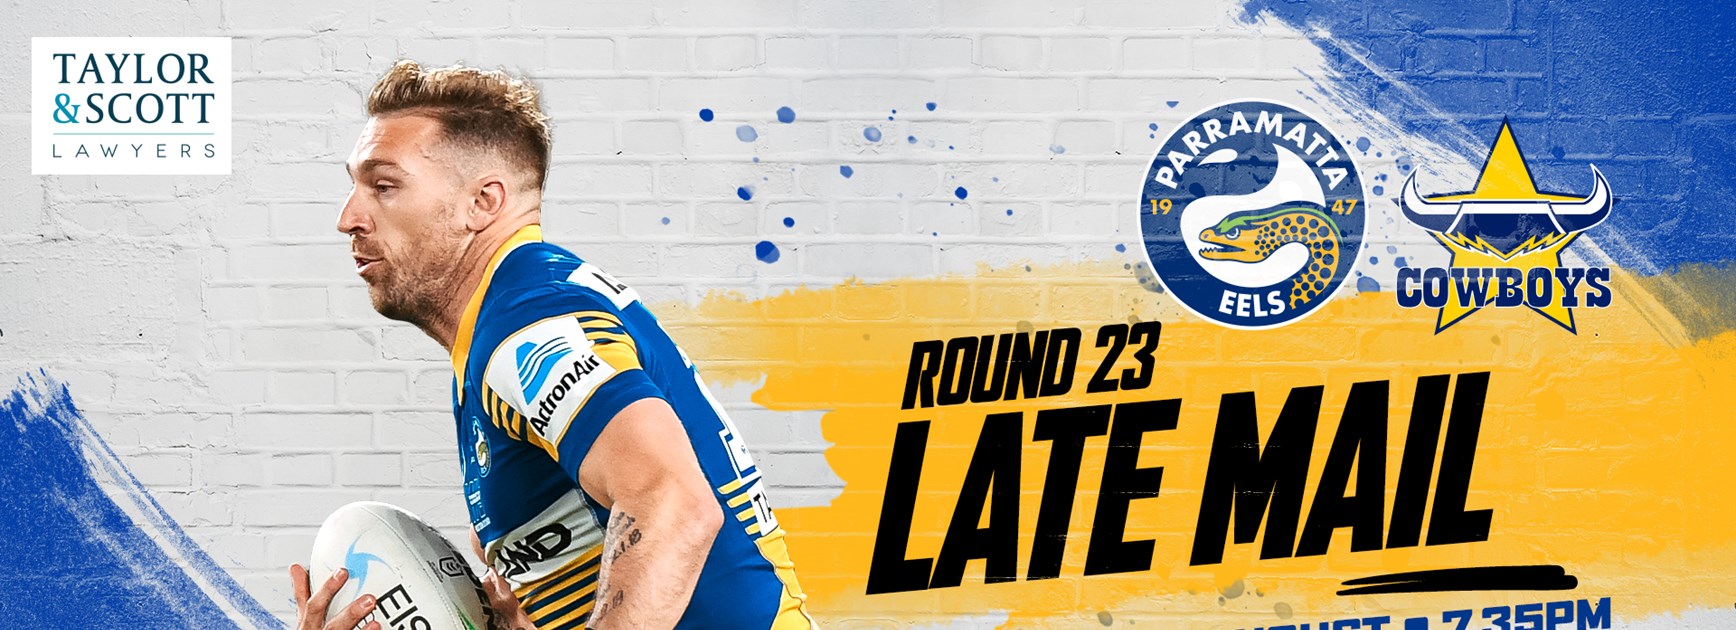 Late Mail - Eels v Cowboys, Round 23